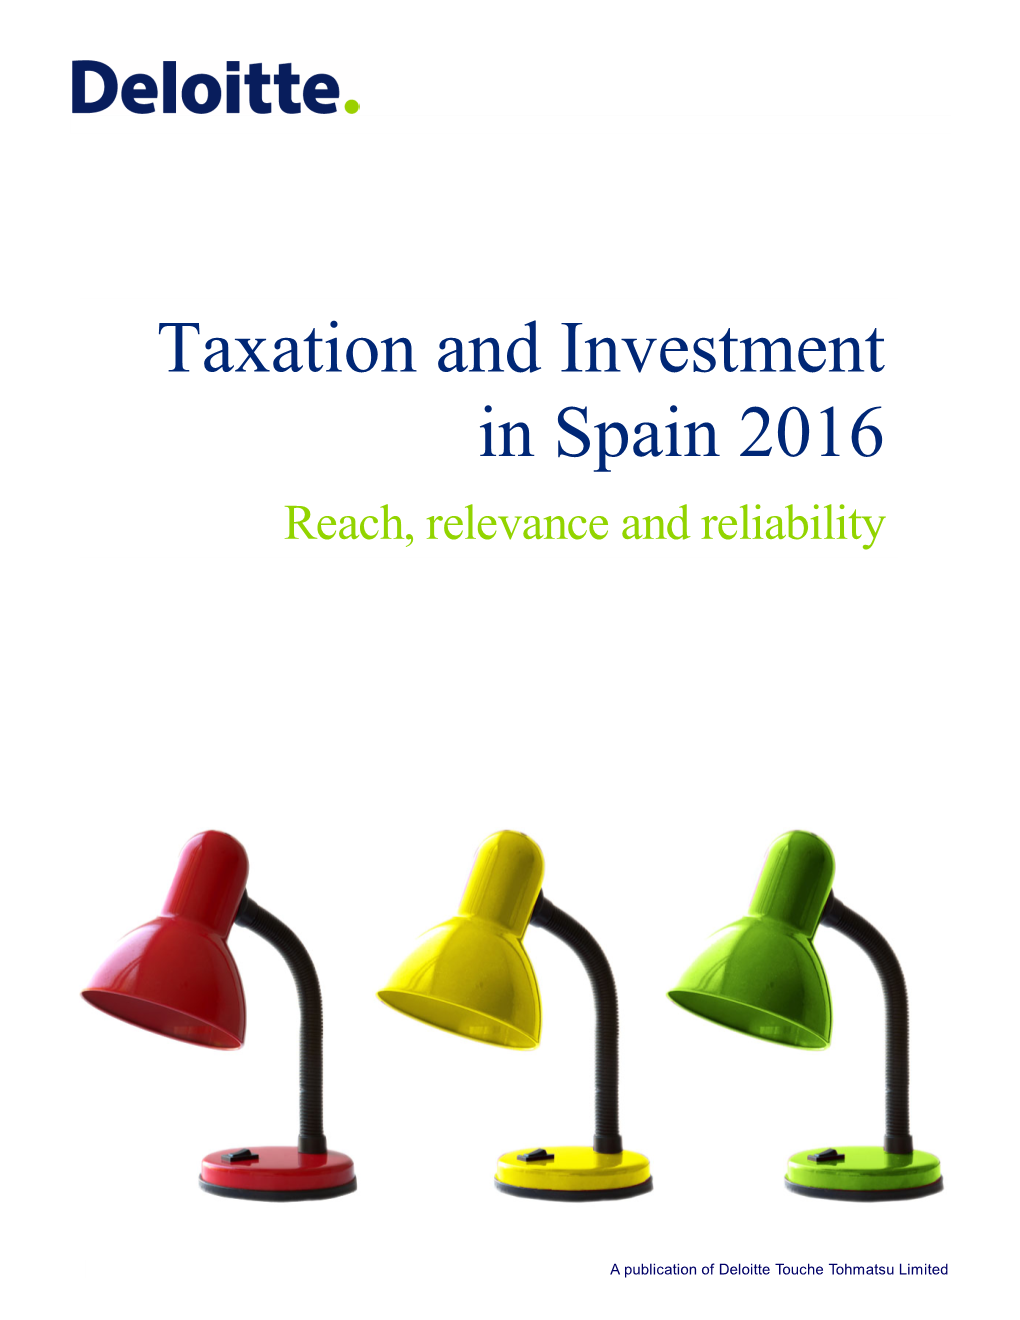 Taxation and Investment in Spain 2016 Reach, Relevance and Reliability